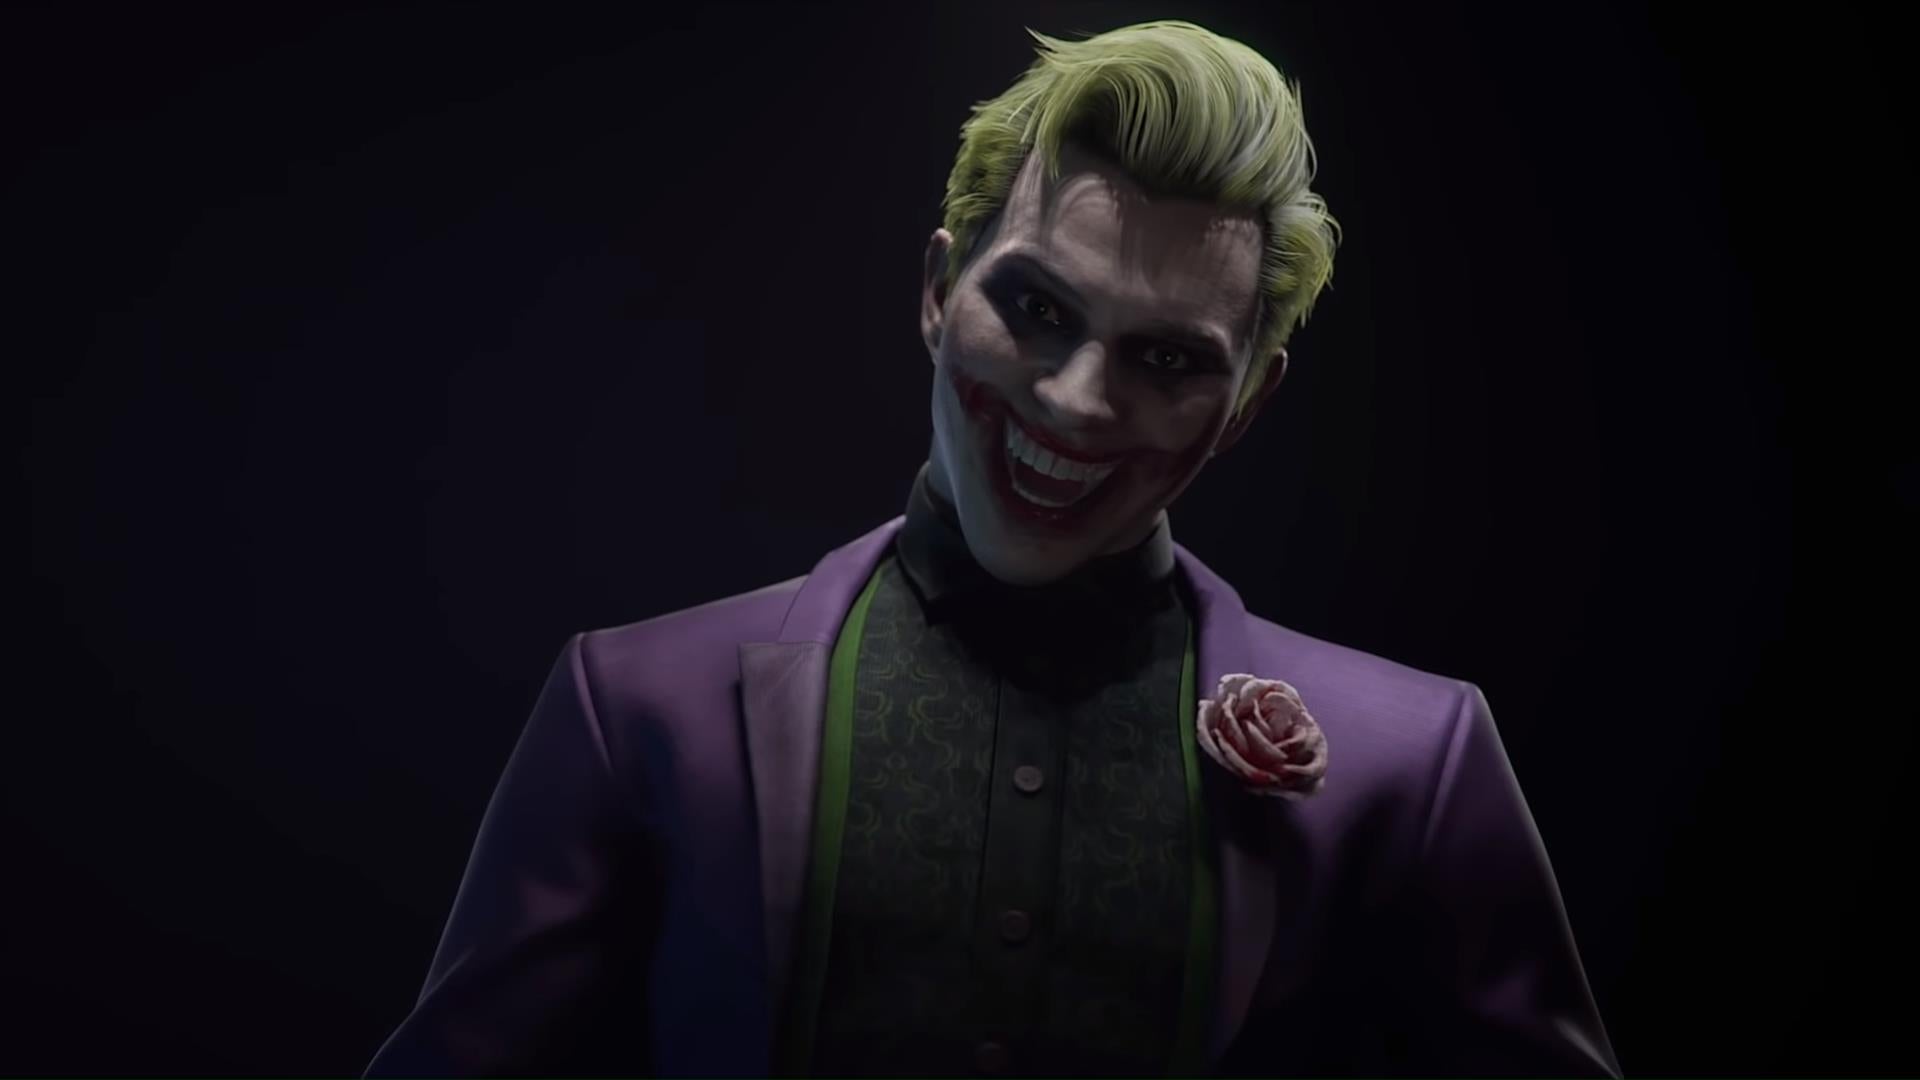 Image for The Joker arrives in Mortal Kombat 11 next month - and crossplay multiplayer is coming too